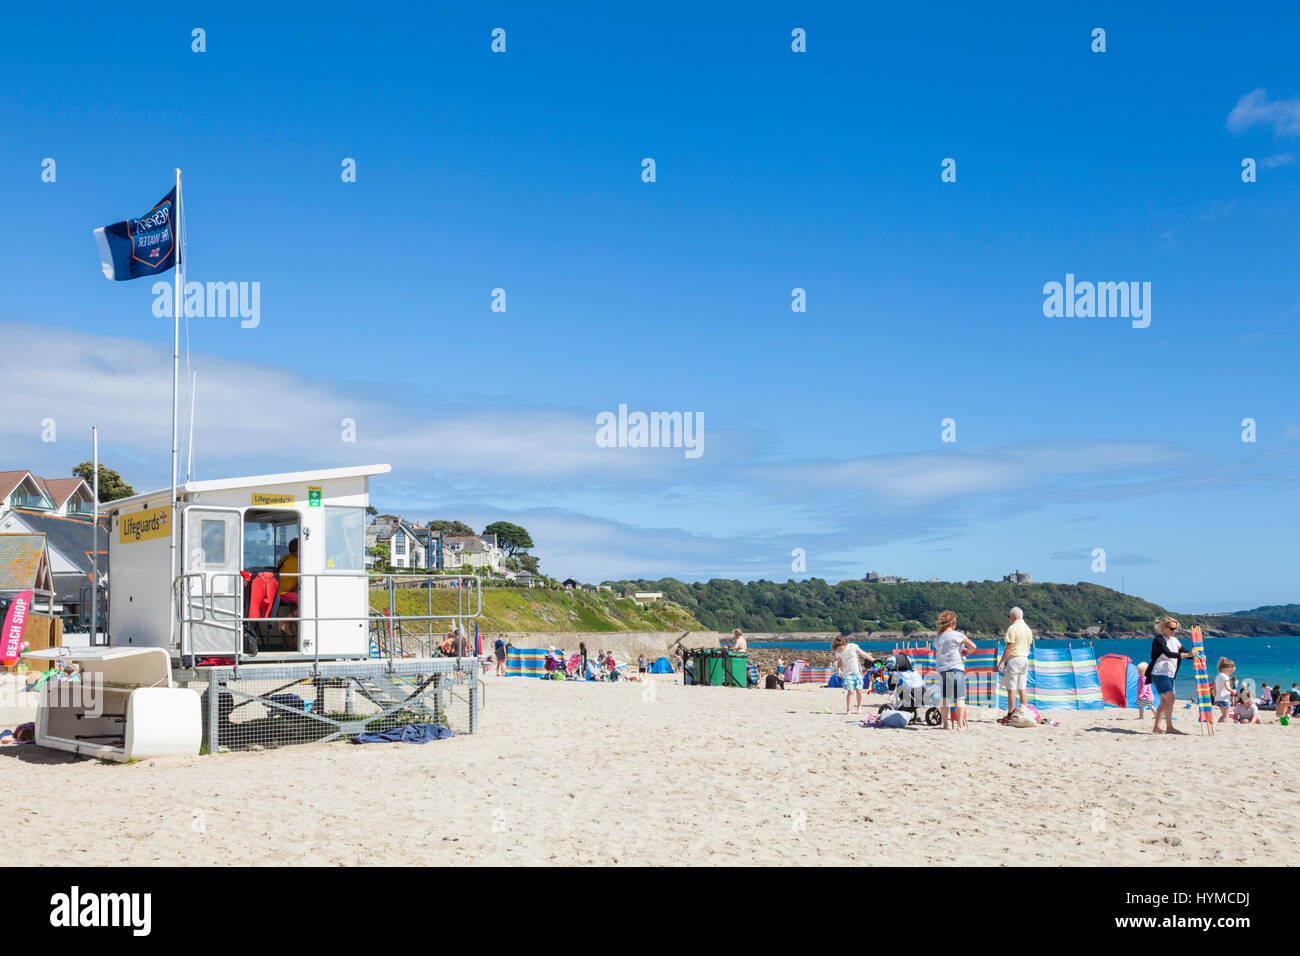 Falmouth cornwall busy Gyllyngvase Beach packed with holidaymakers on a busy beach Falmouth Cornwall west country england gb uk eu europe Stock Photo